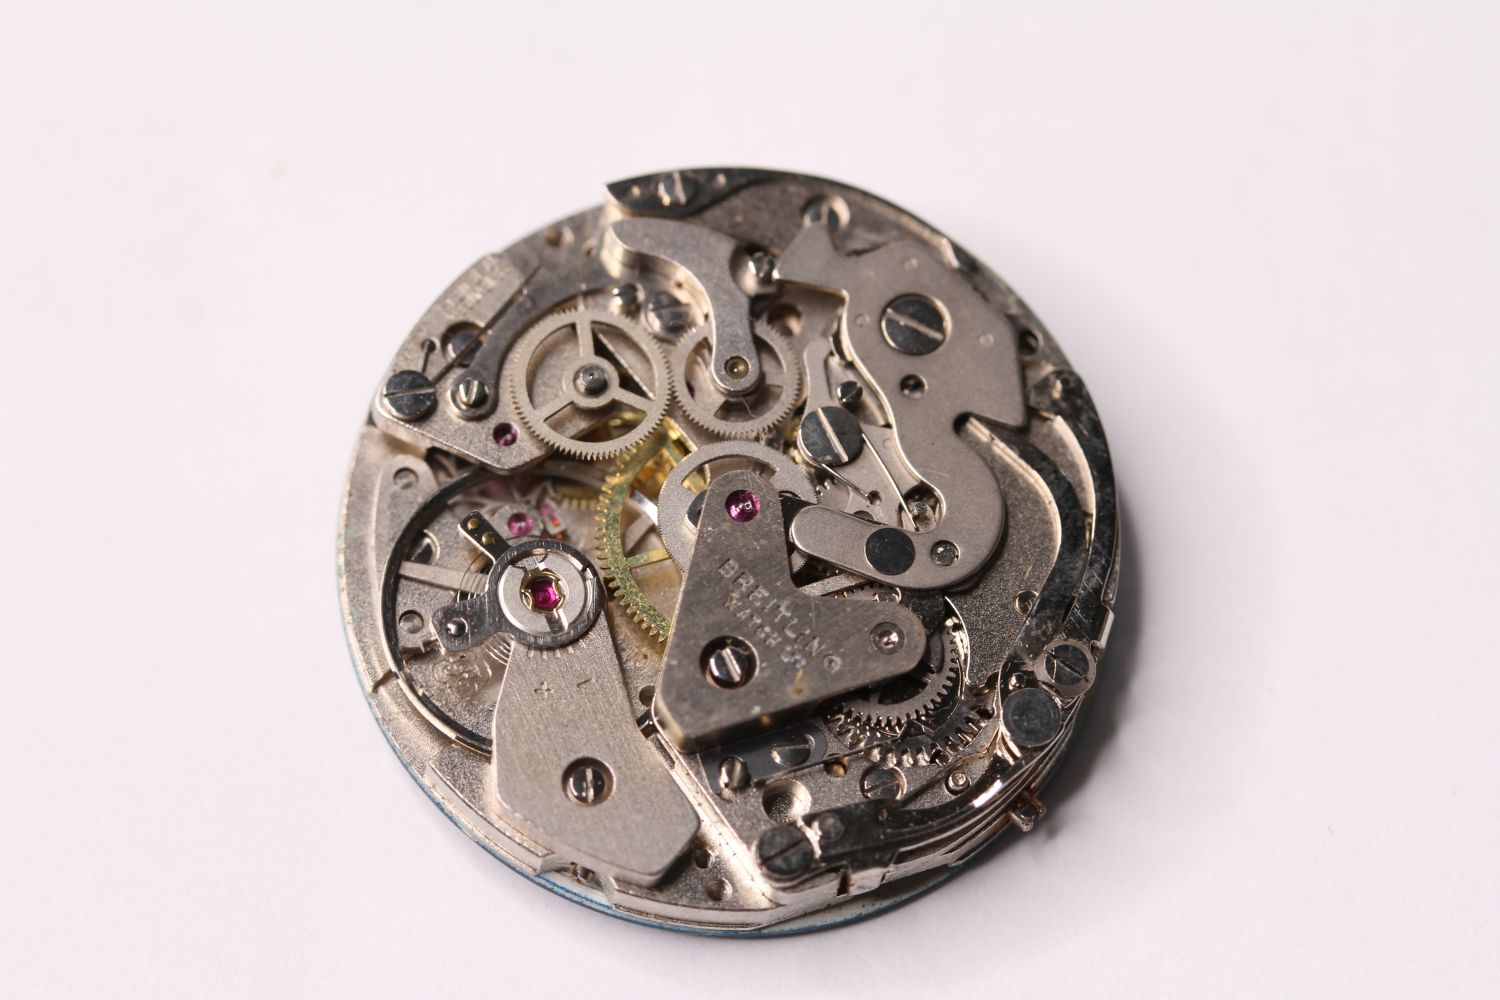 BREITLING SPRINT CHRONOGRAPH, DIAL, HANDS, 17 JEWEL MOVEMENT, REFERENCE 7733, balance wings freely - Image 2 of 2